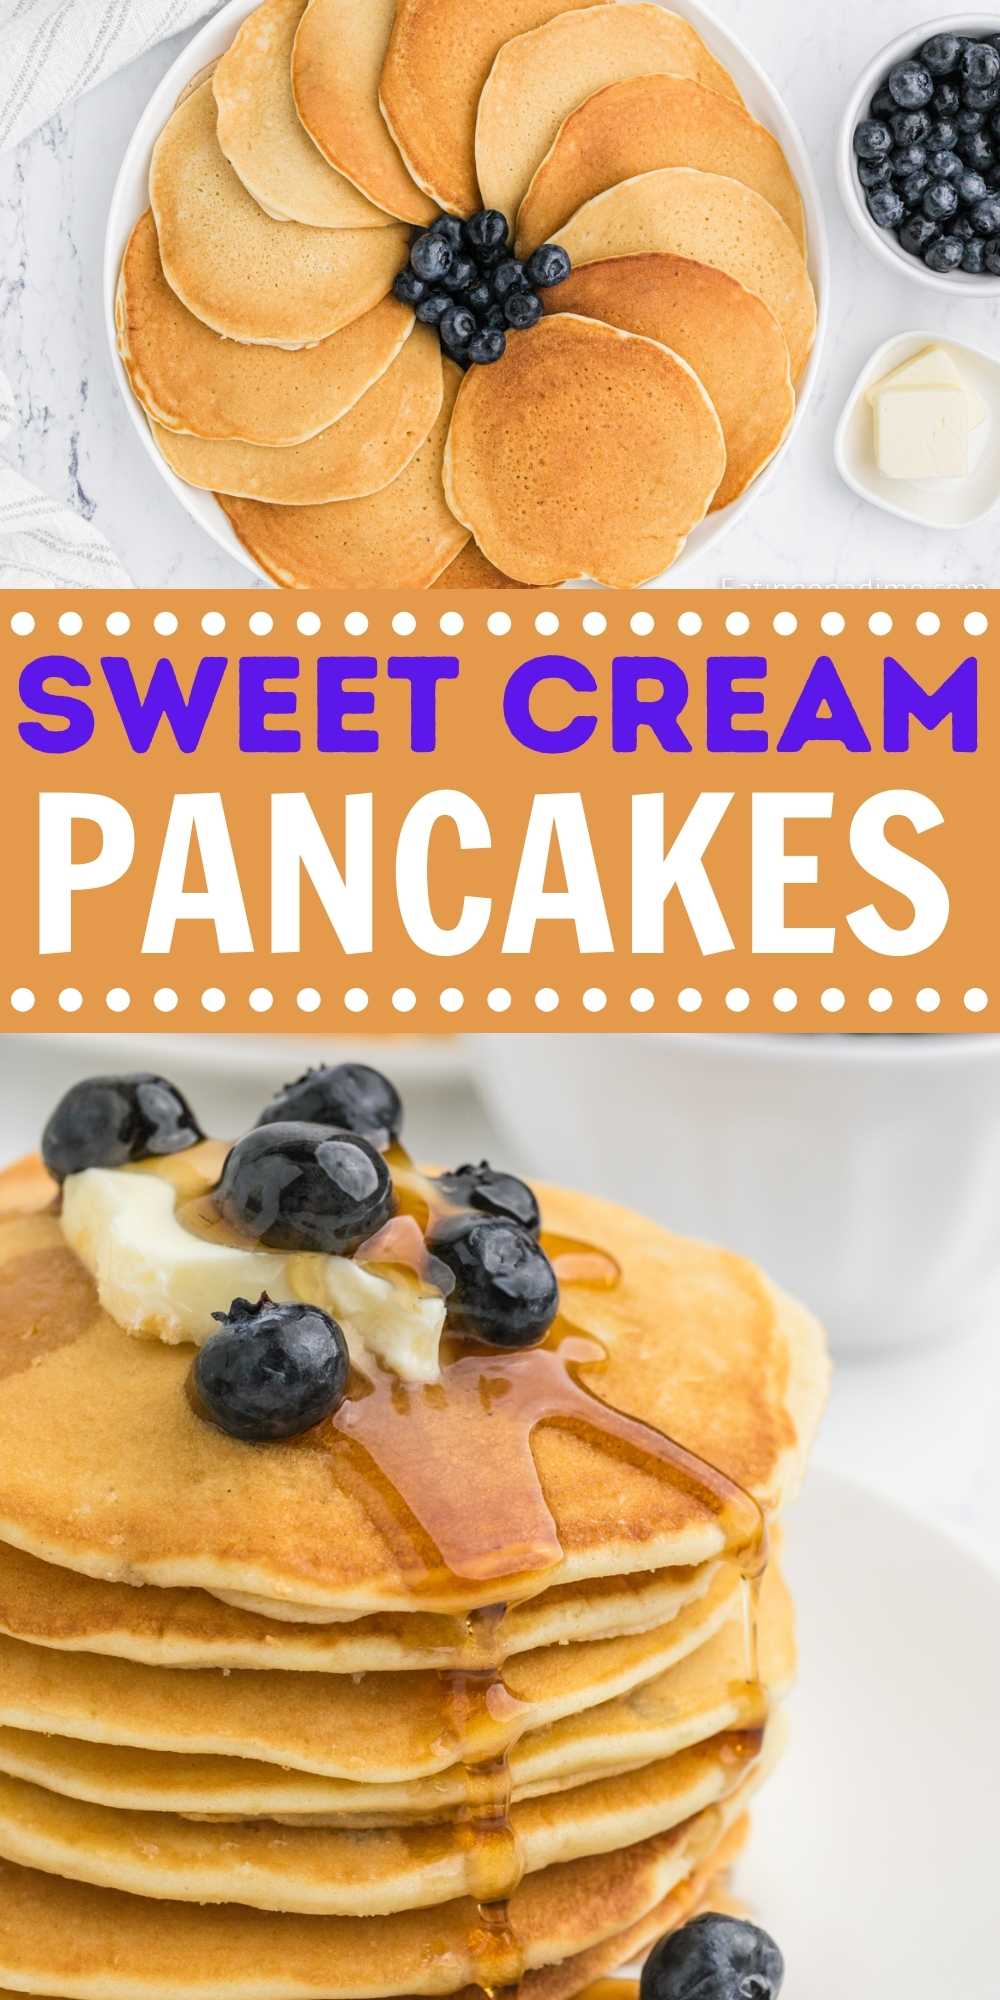 Sweet Cream Pancakes are thick, heavy, sweet and creamy. Take you classic pancake recipe to the next level with a simple creamy ingredient. Easy to make with simple ingredients. #eatingonadime #sweetcream #pancakes #breakfast